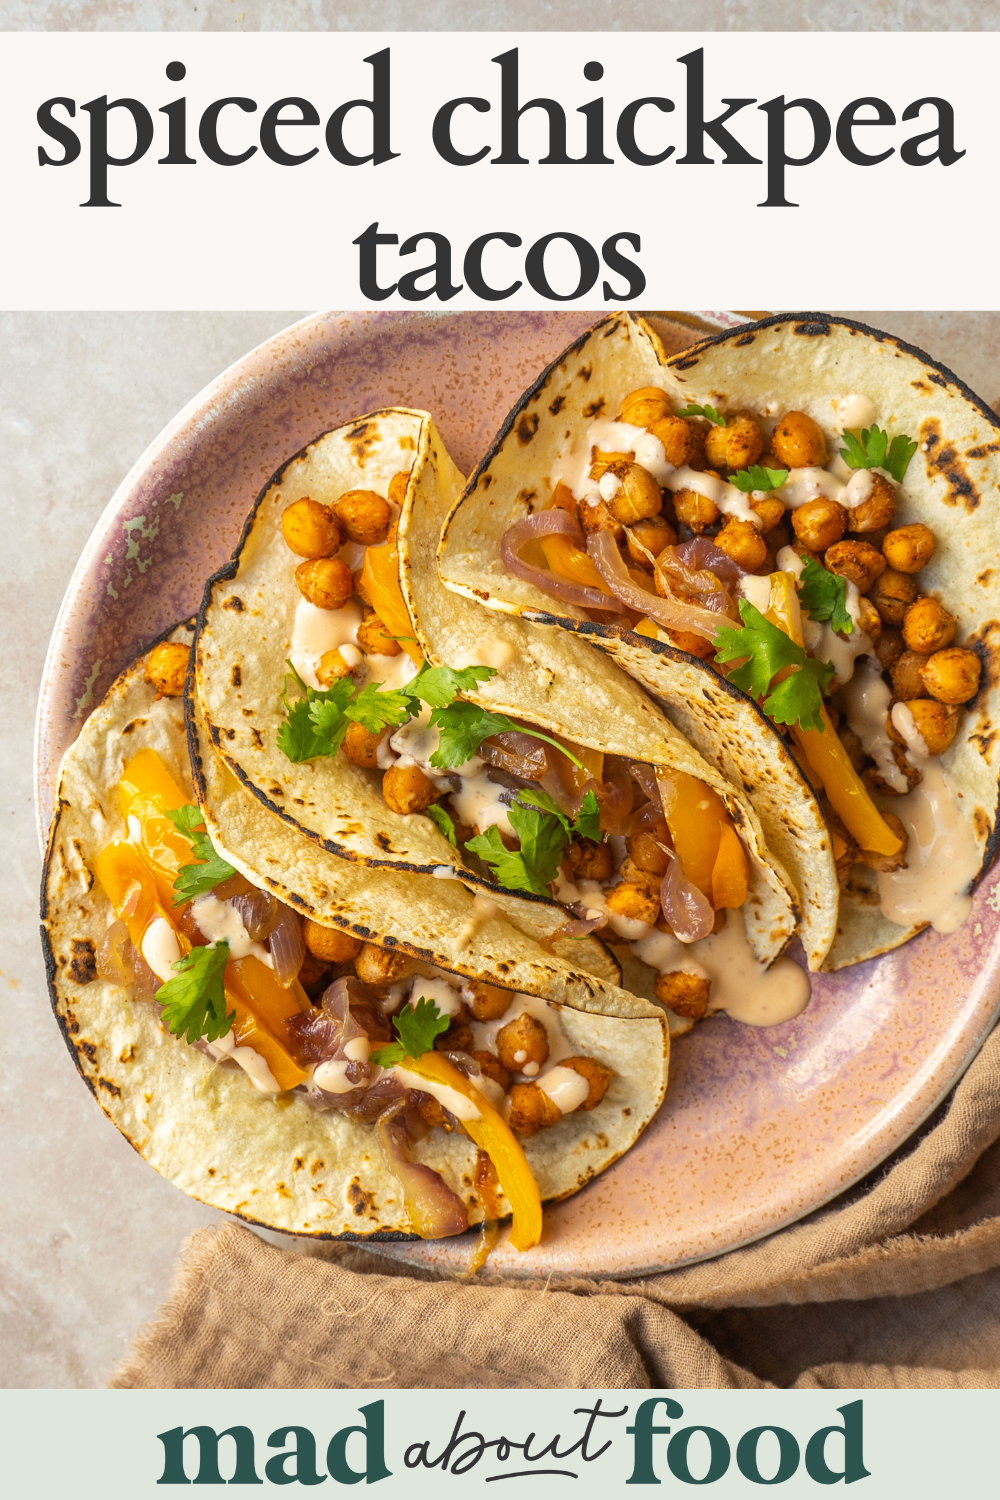 Image for pinning spiced chickpea tacos recipe on pinterest